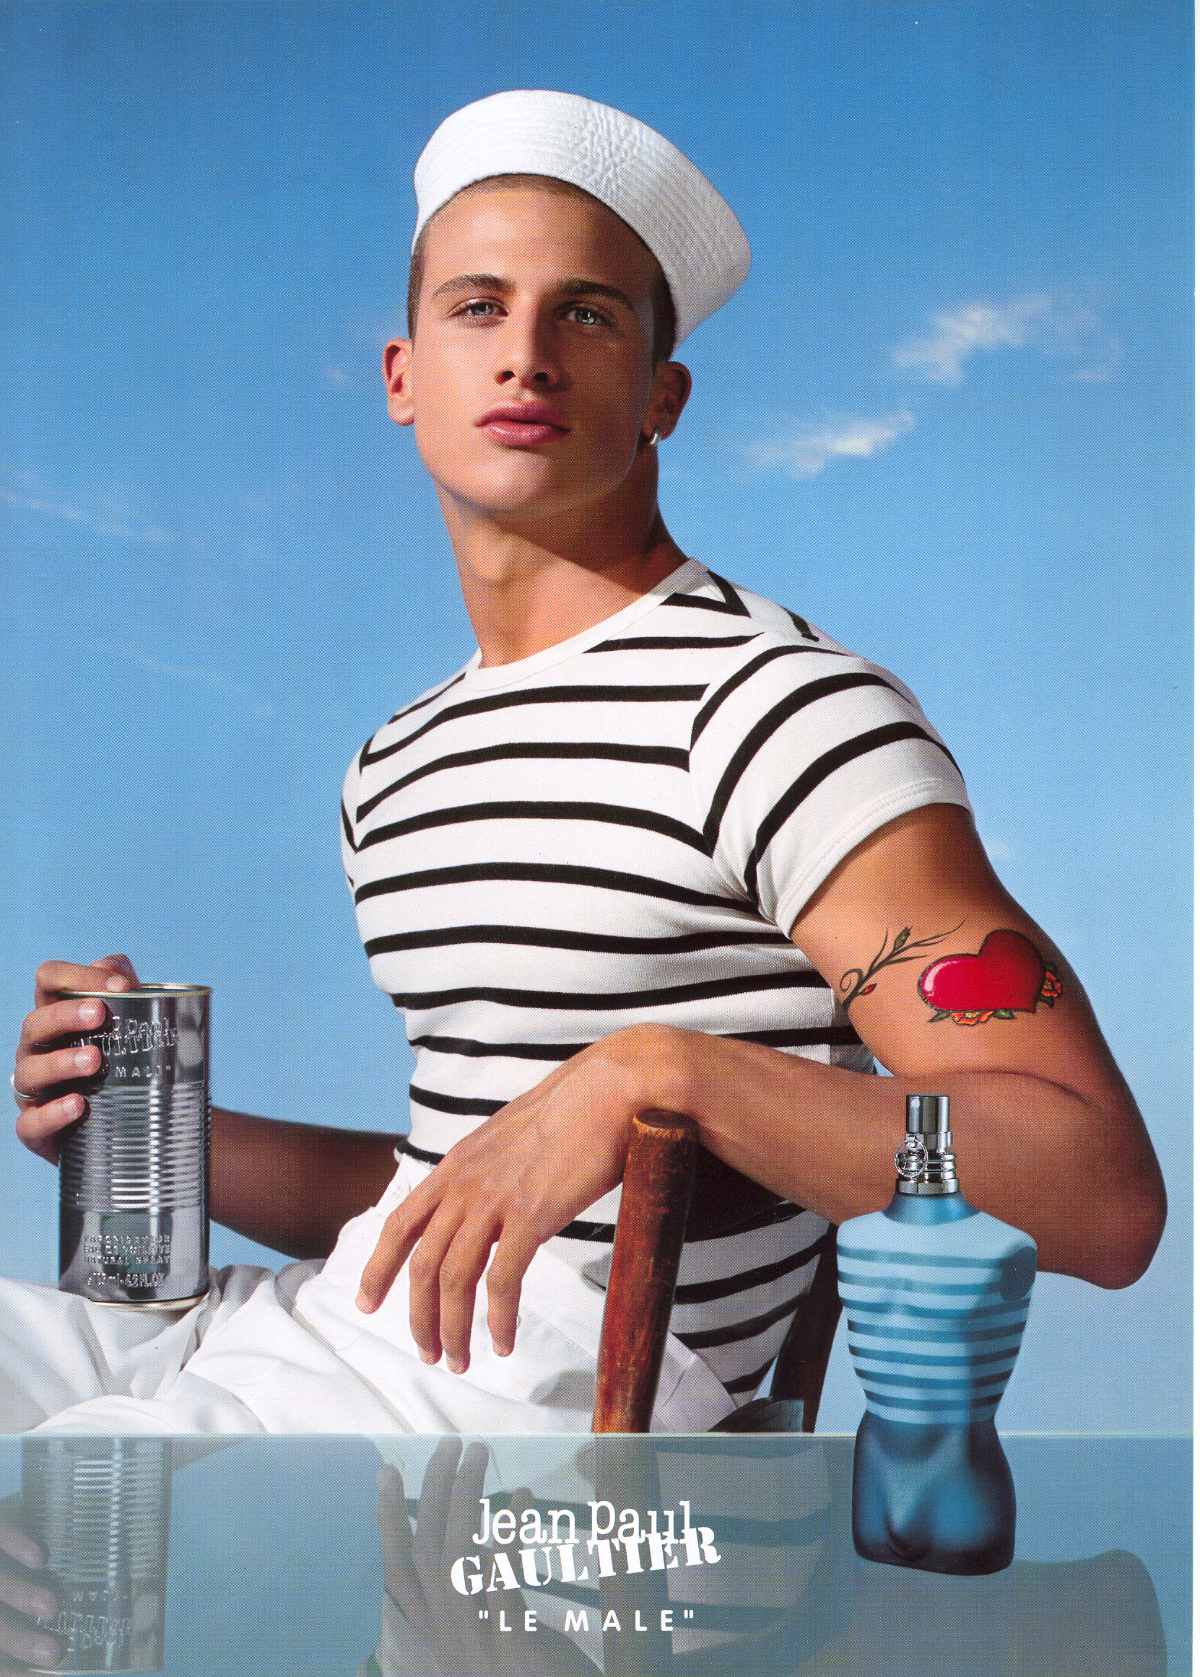 Le Male by Jean Paul Gaultier - 25th anniversary